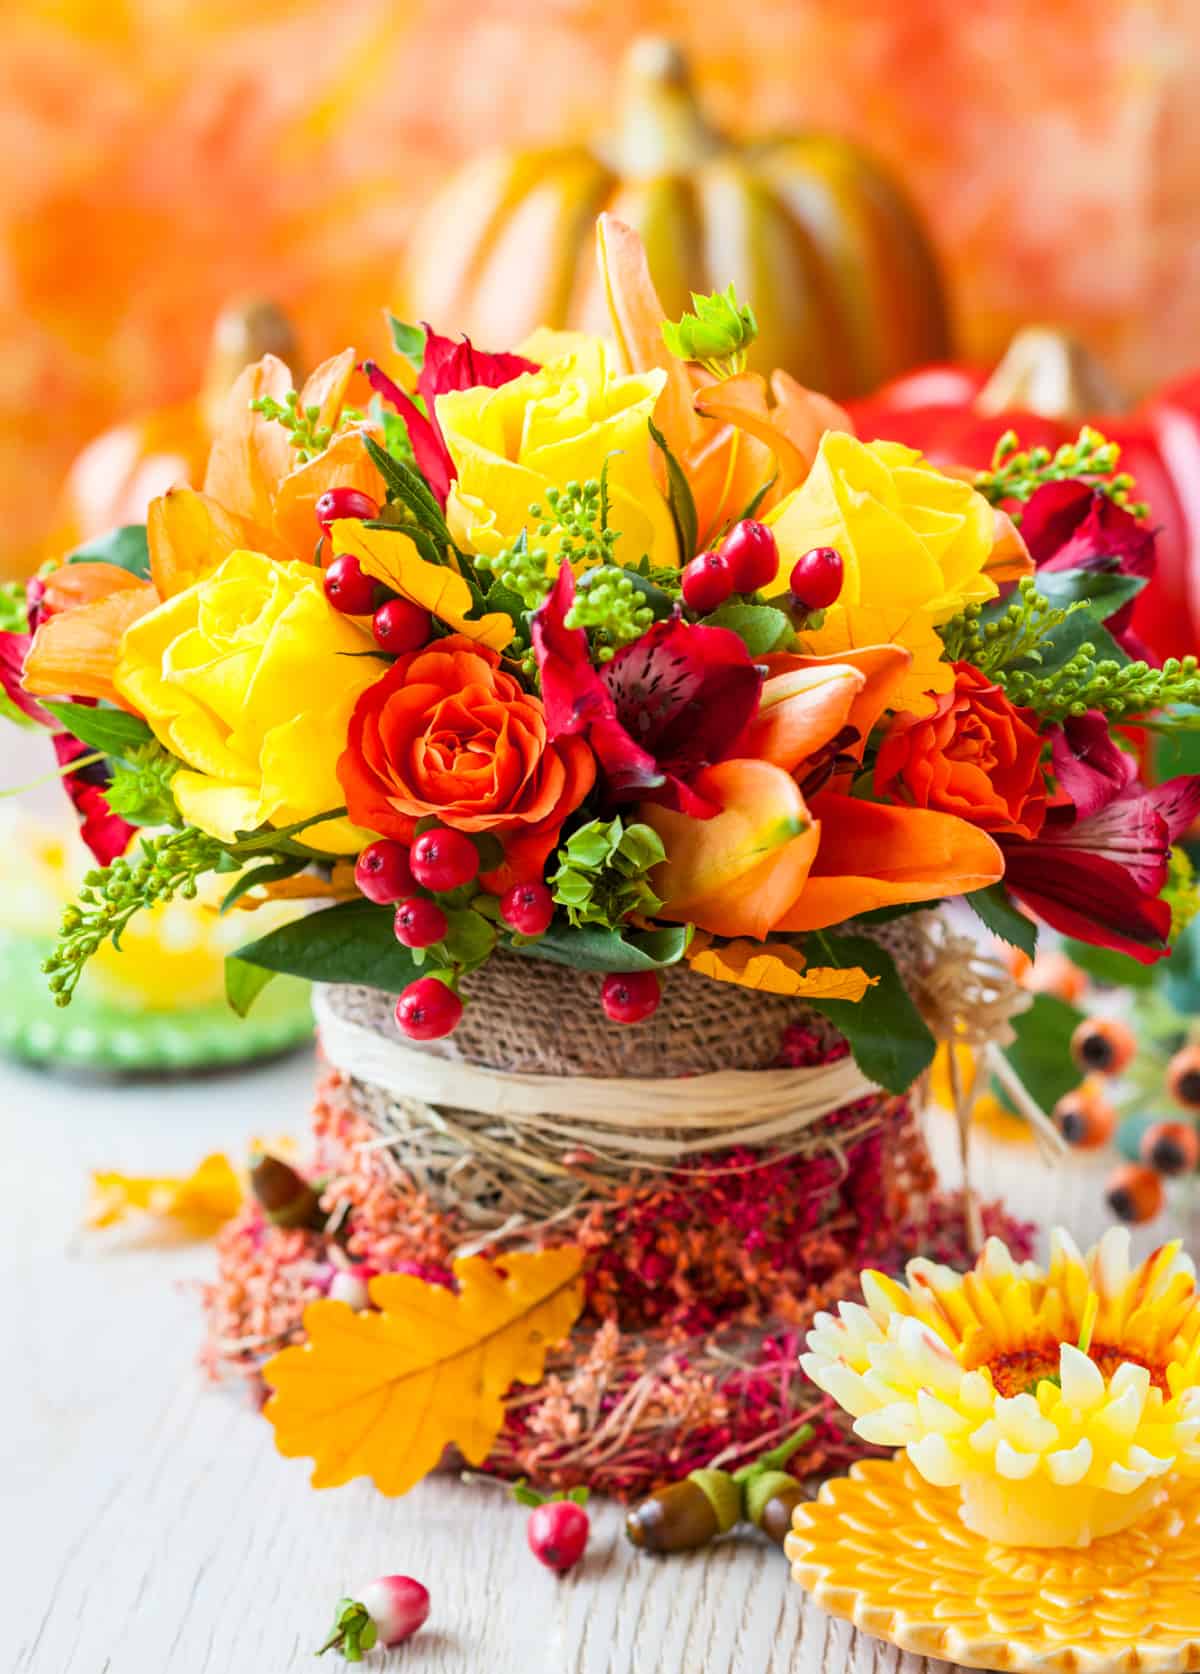 Floral arrangement using yellow and orange roses for a Thanksgiving centerpiece